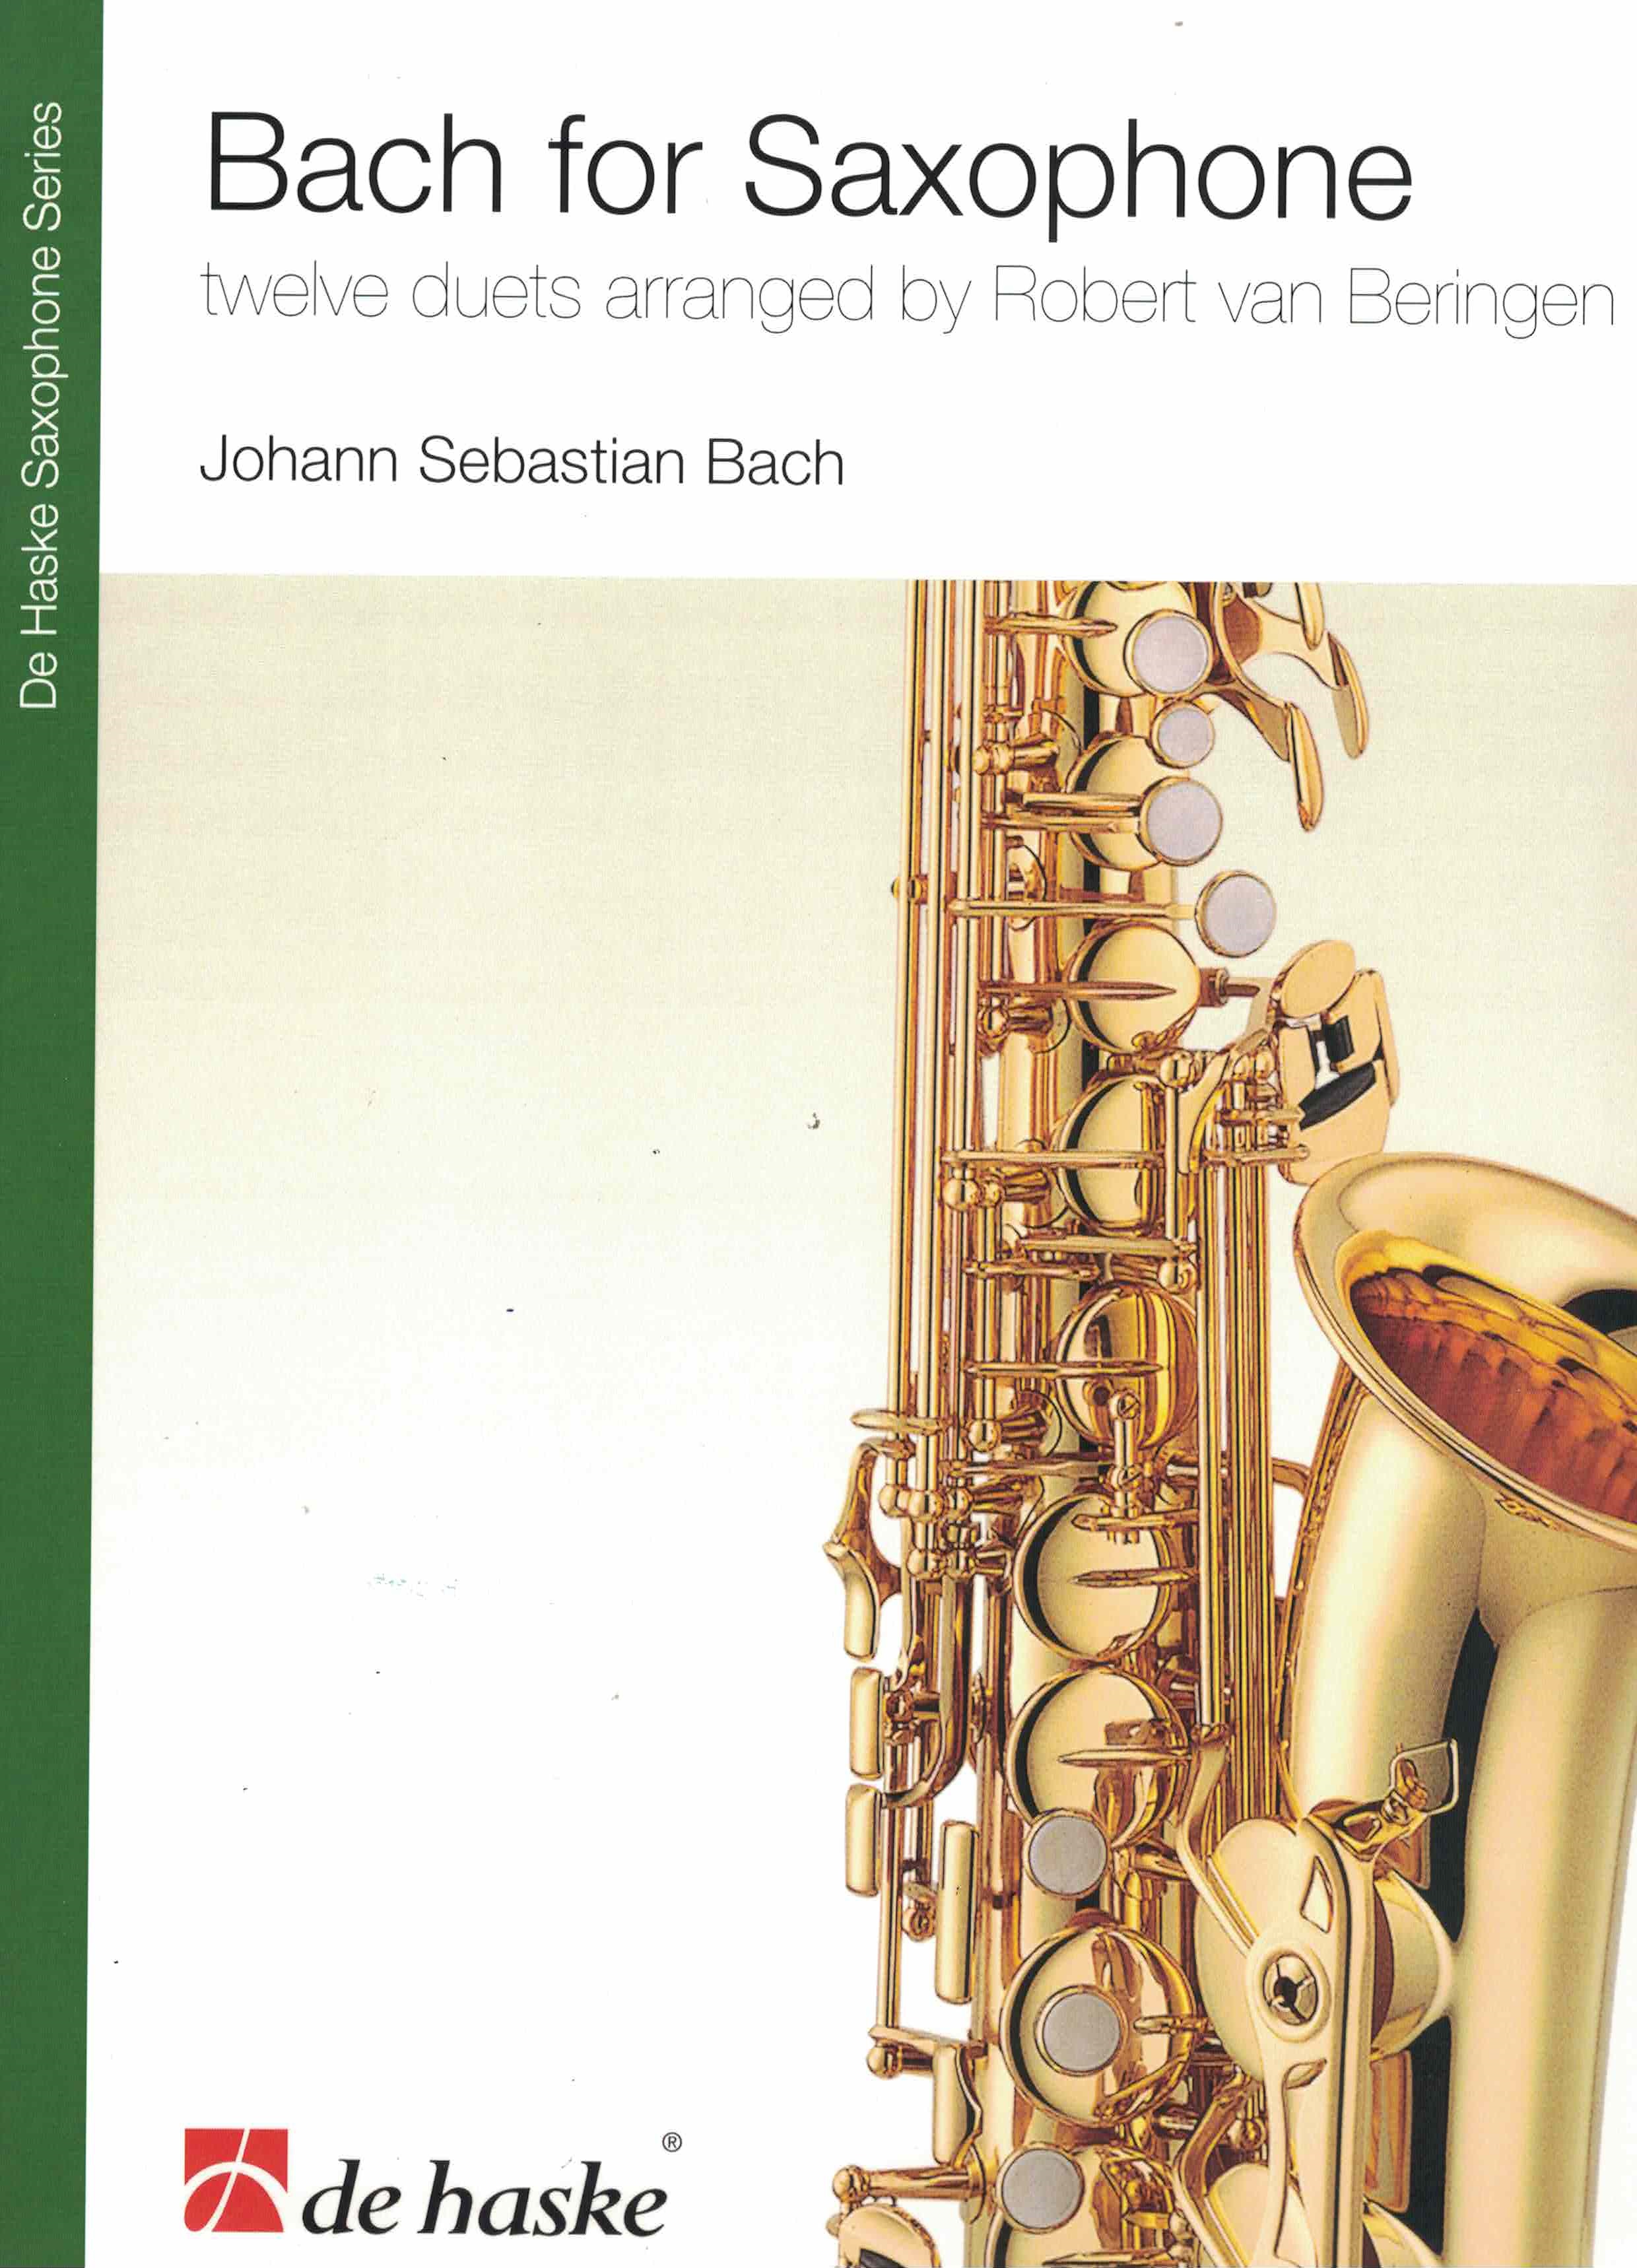 Bach for Saxophone - 12 Duets, 2 Altsaxophone